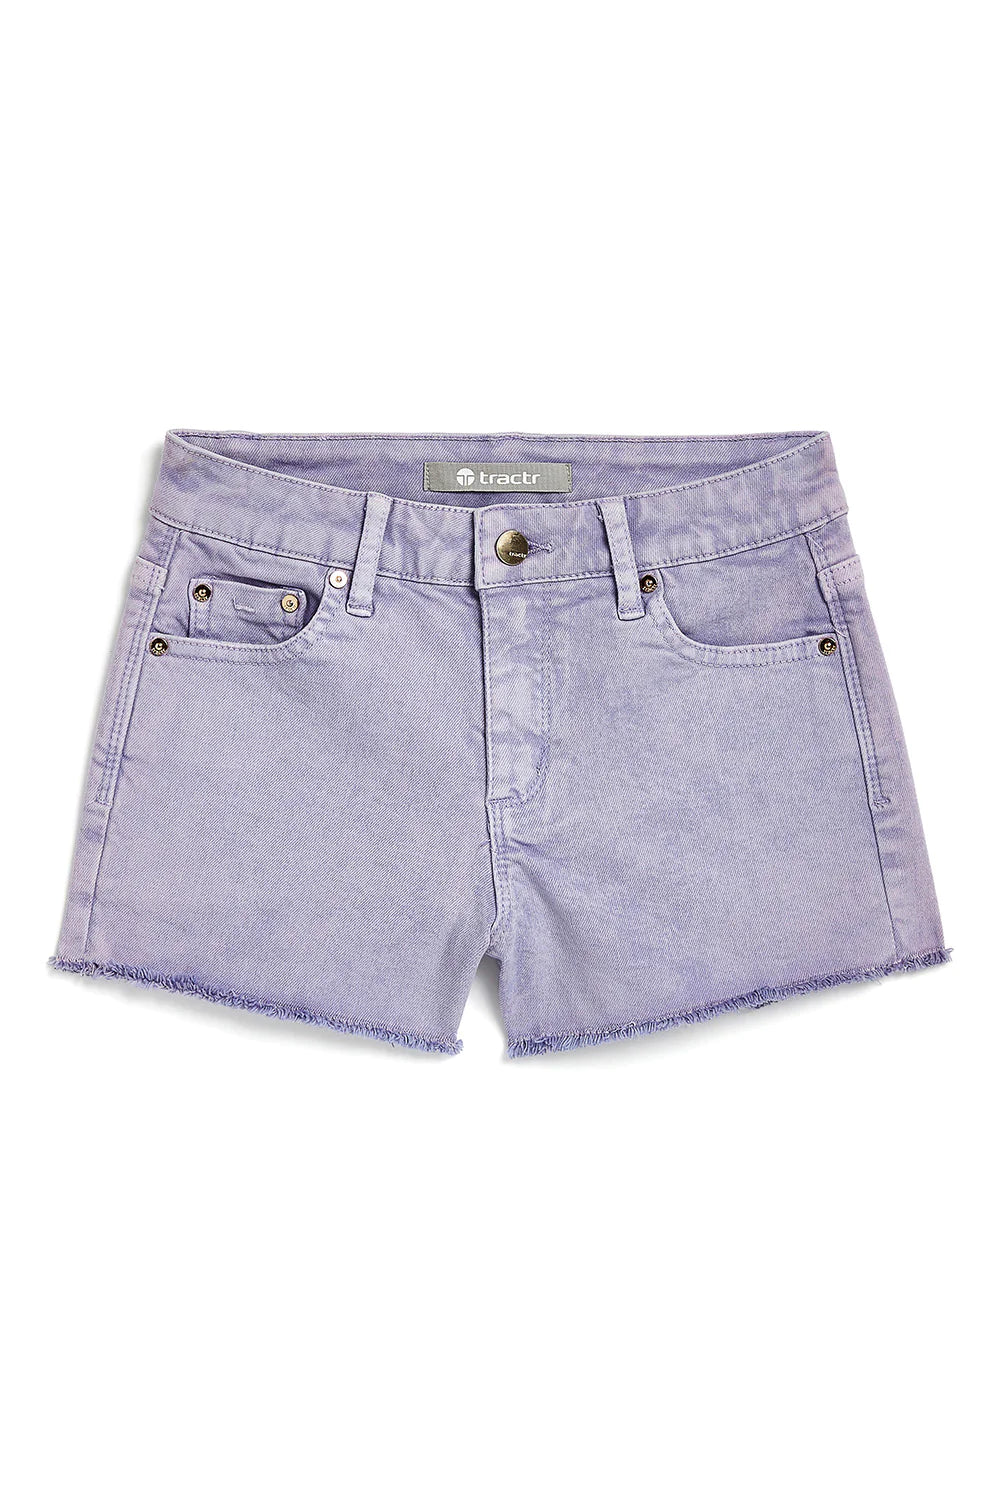 Tractr Brittany Fray Shorts